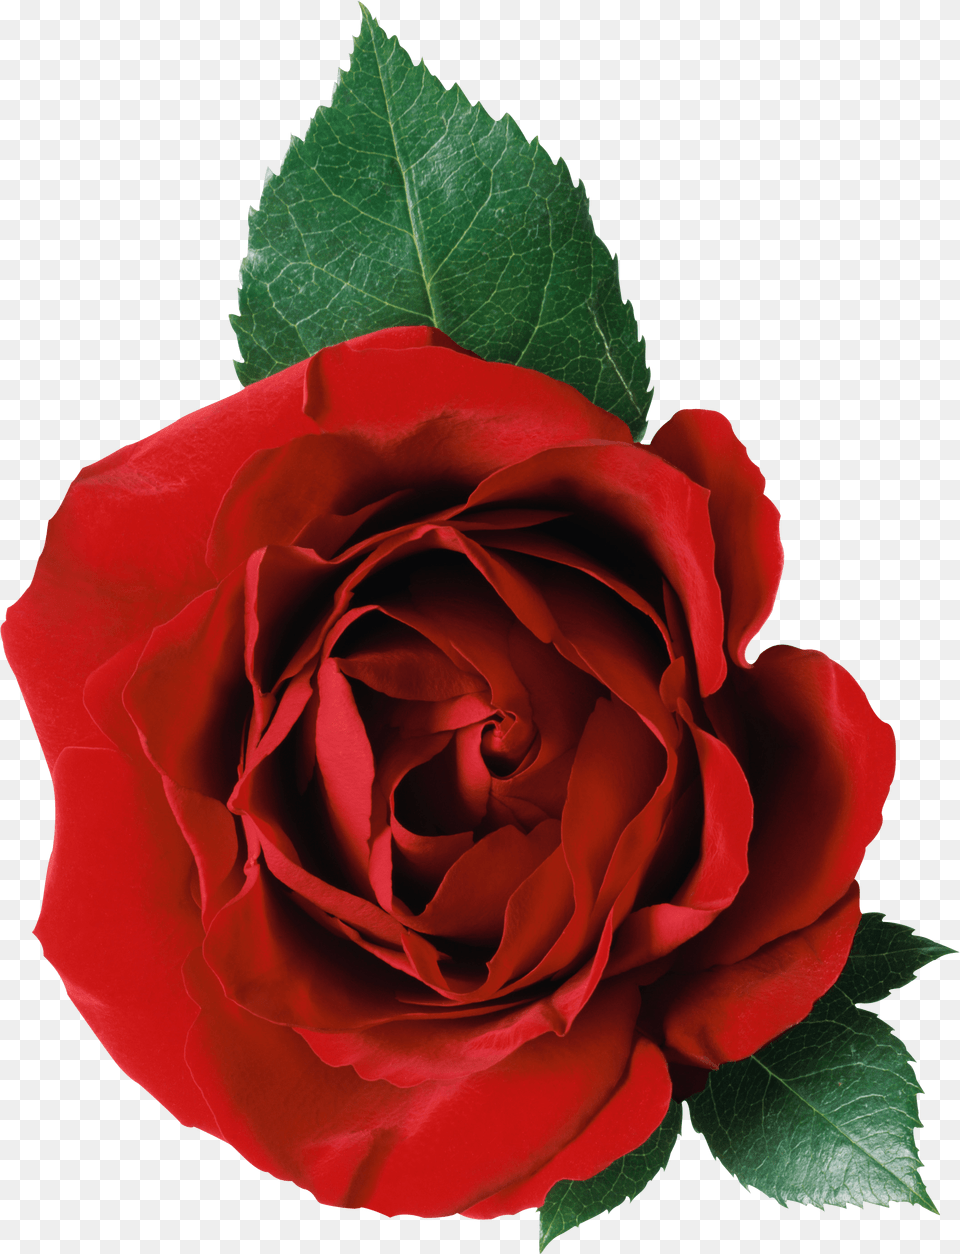 One Rose And Leaves Transparent Rose Flower, Plant Png Image